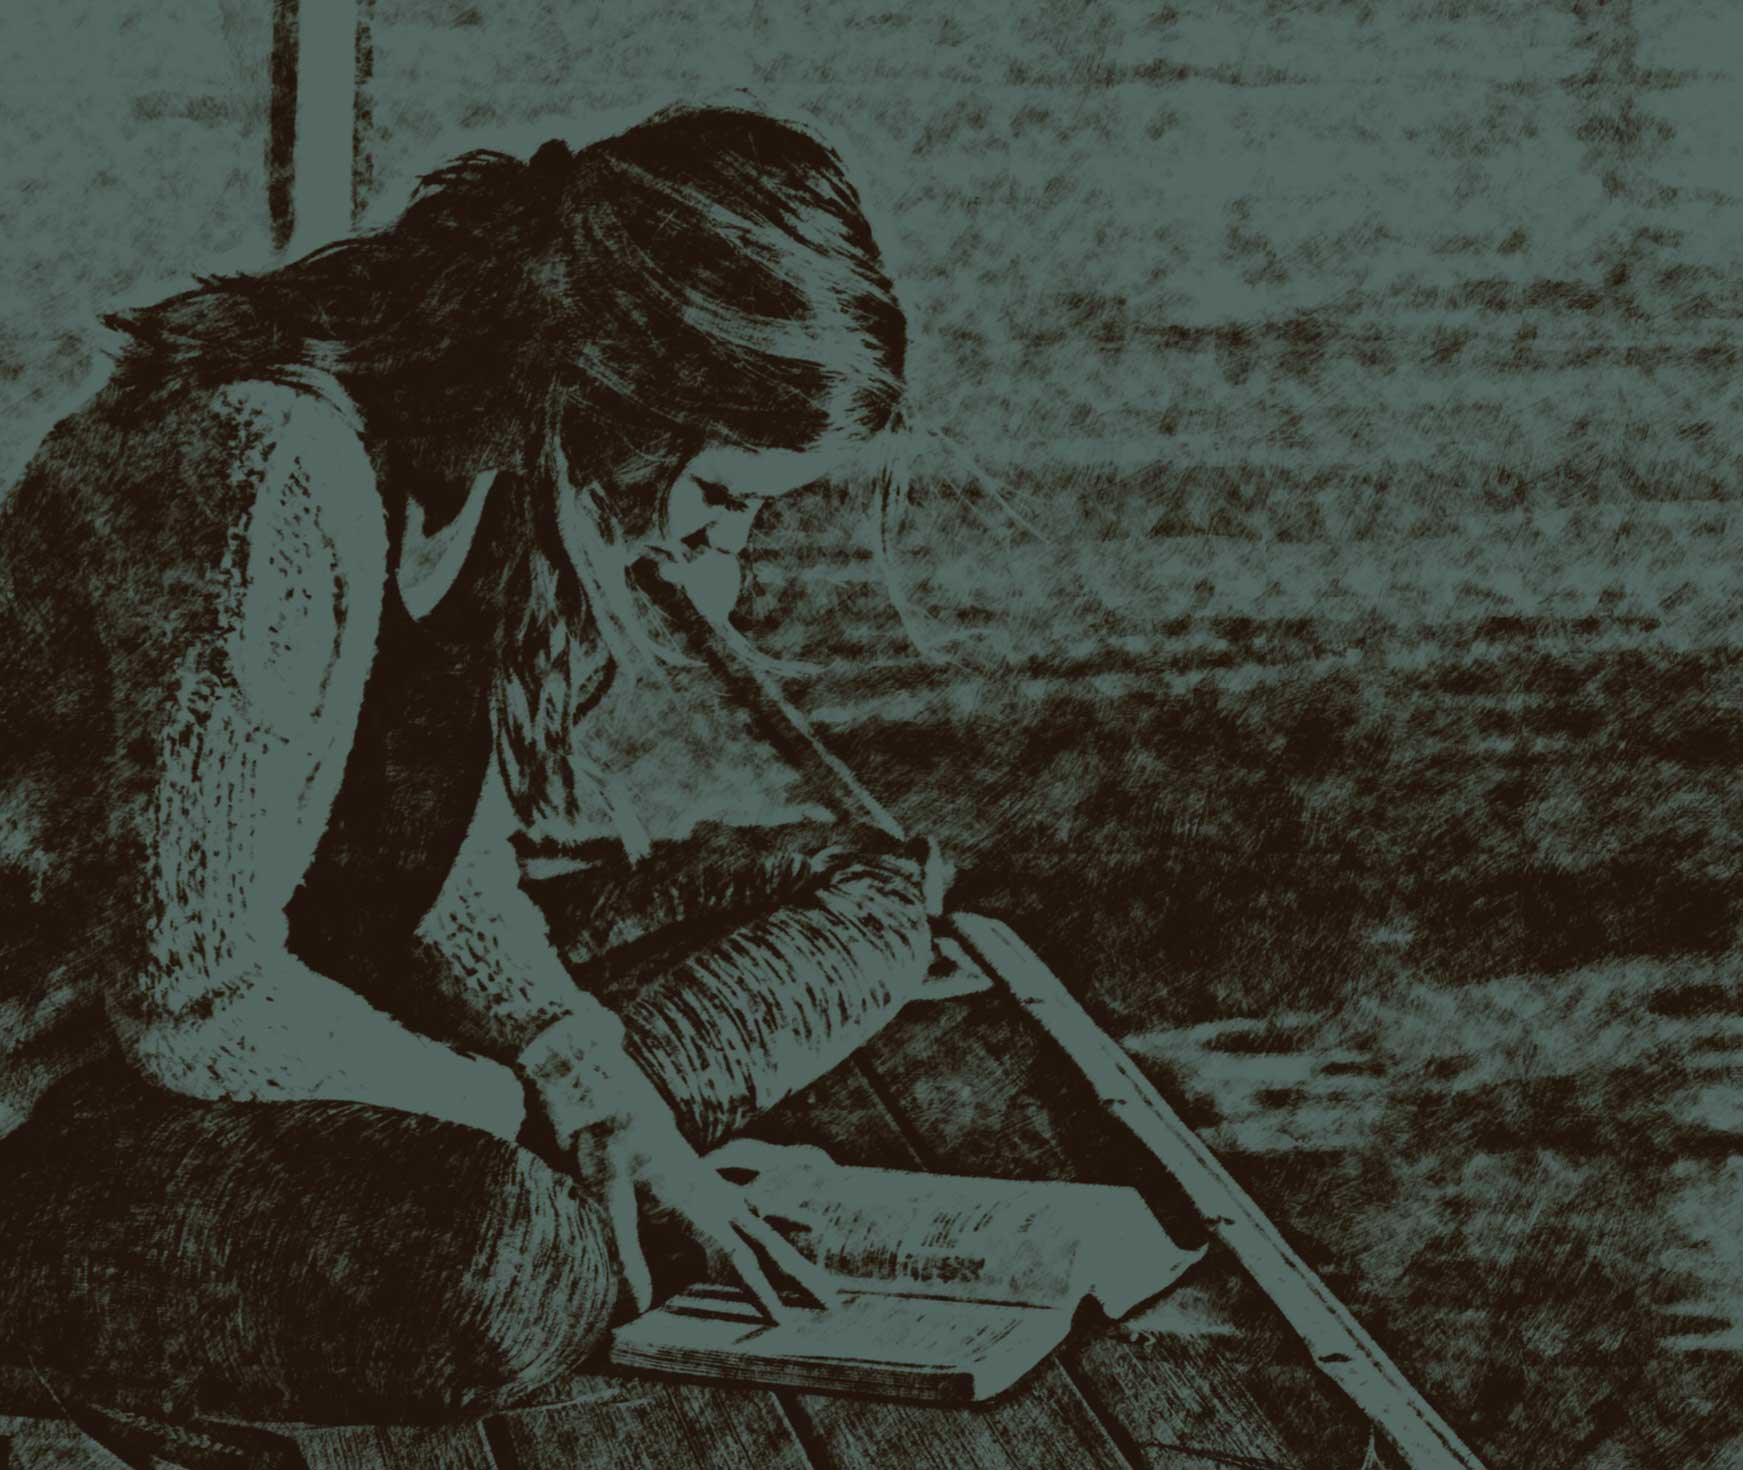 Faint image of a person reading a book.